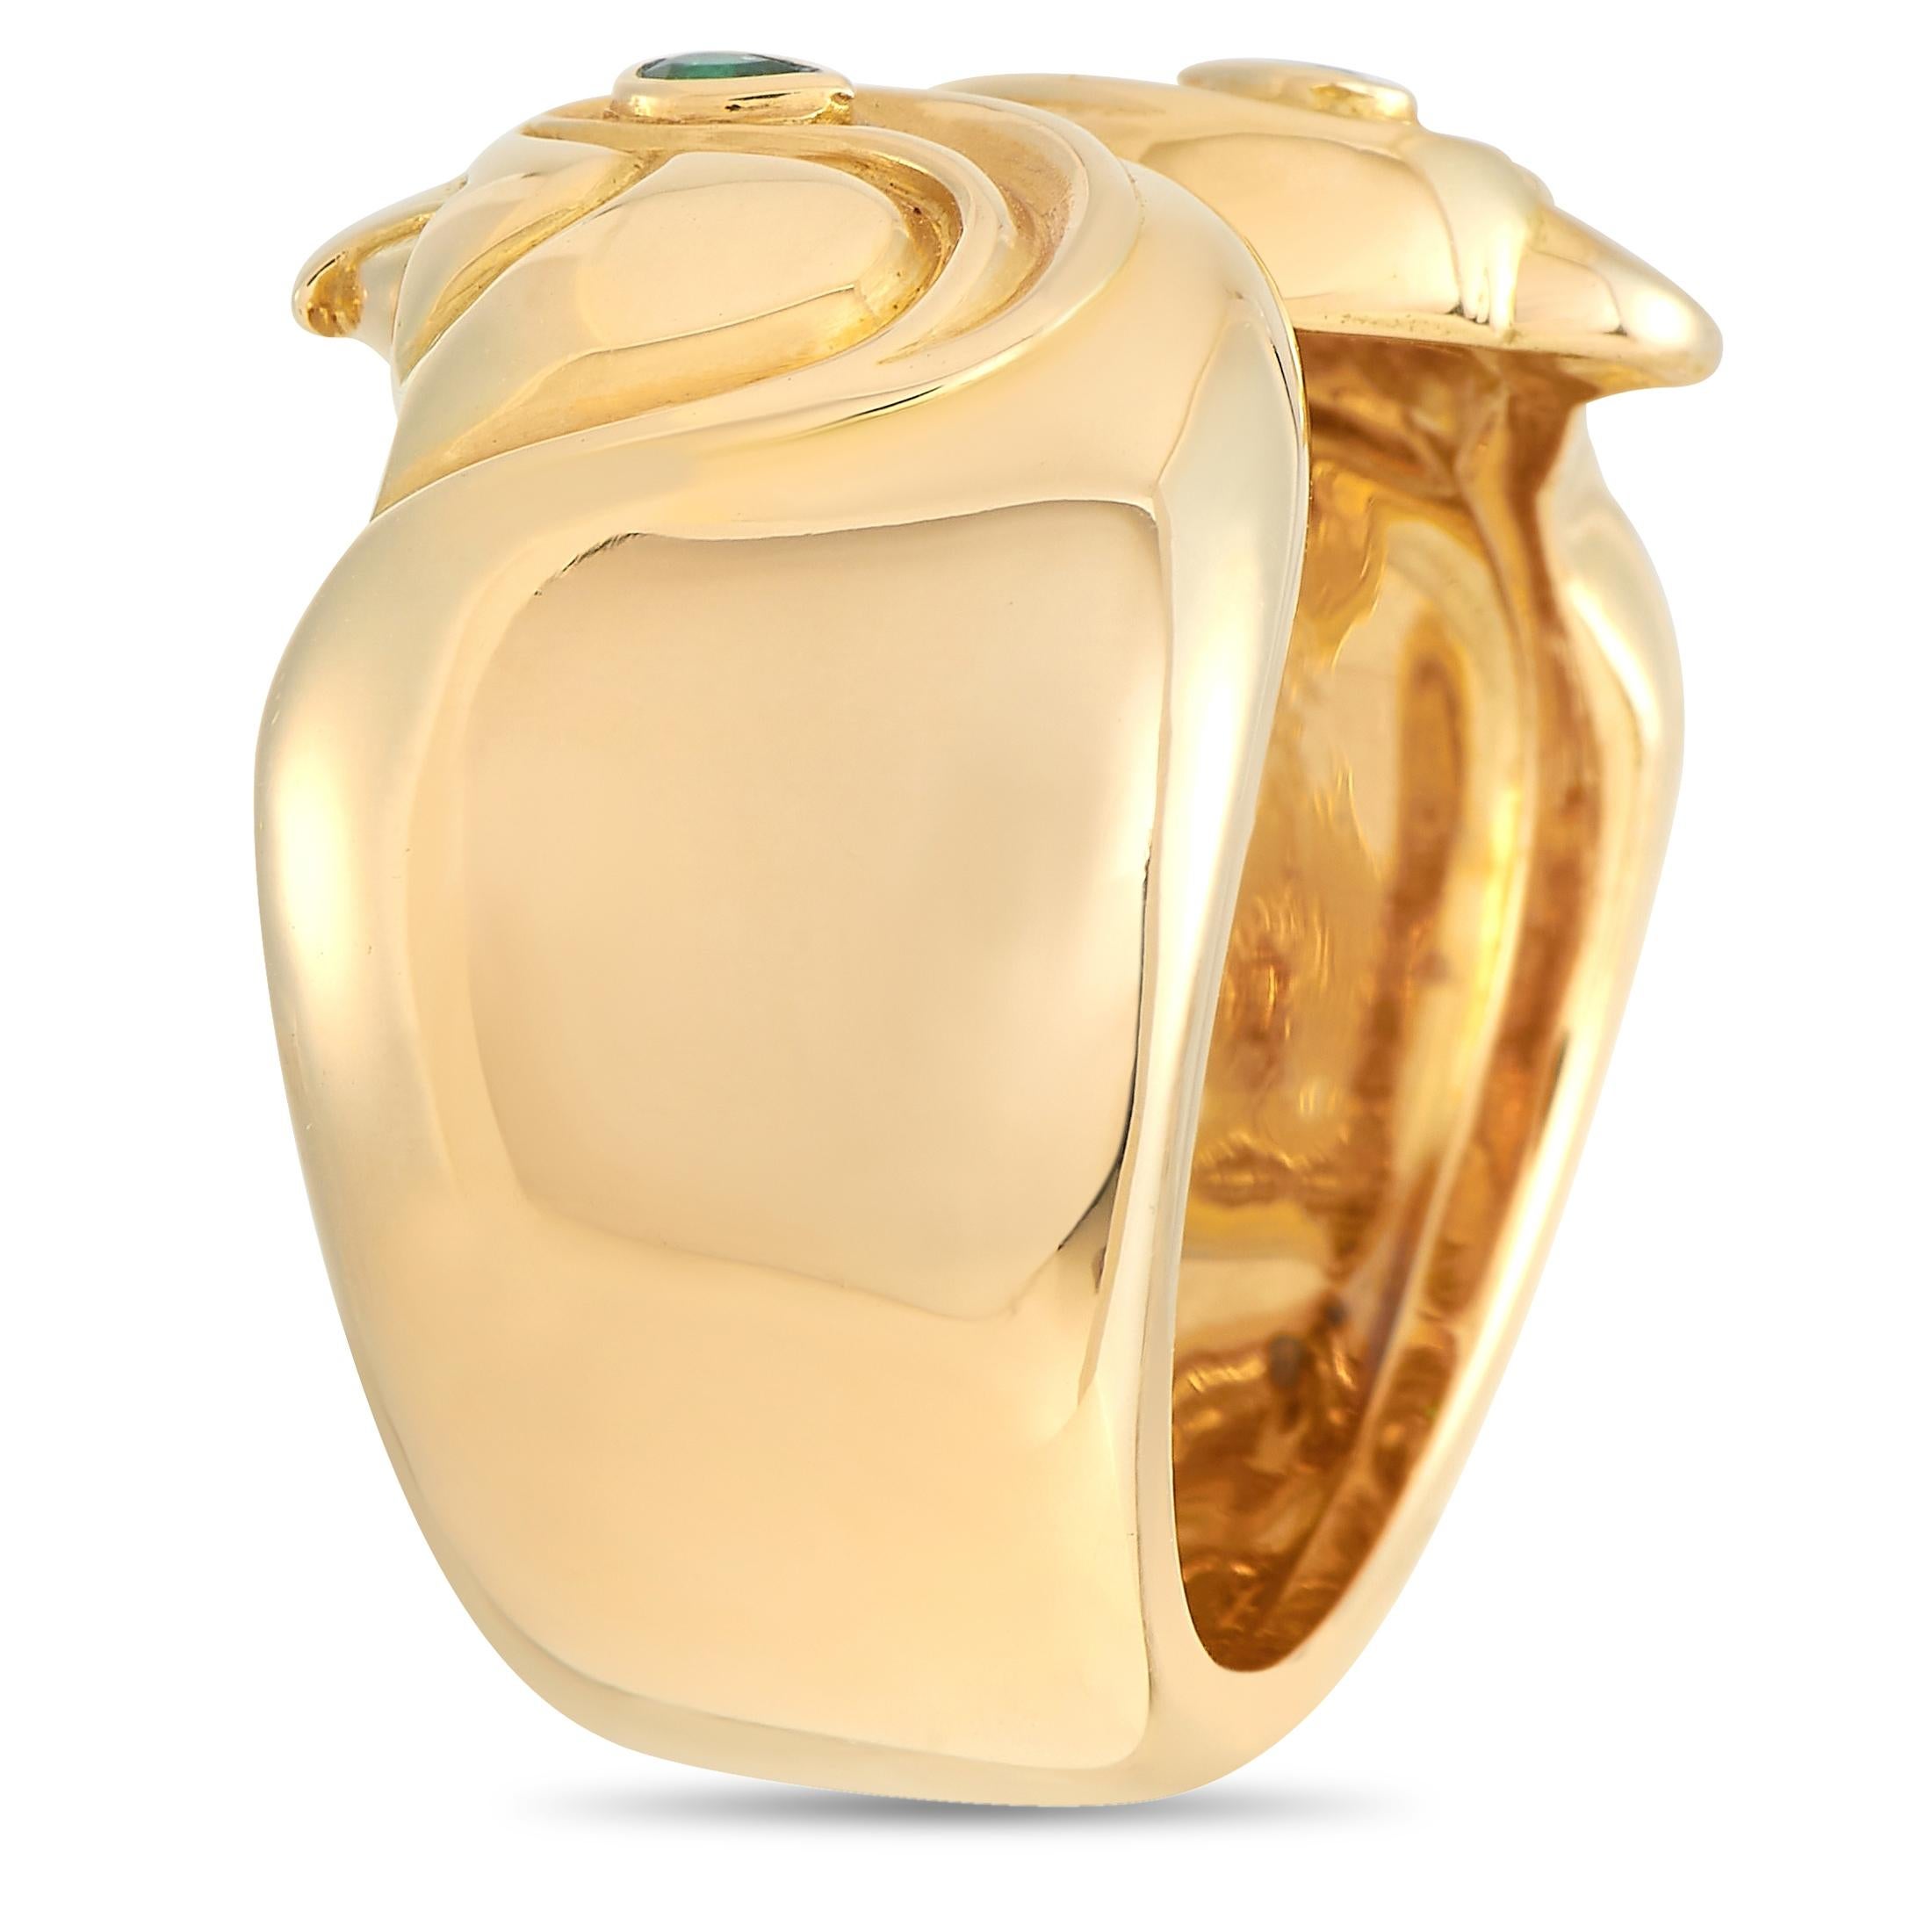 You’ll feel like modern royalty whenever you have on this impeccably designed Cartier Anoubois Ring. Inspired by Egyptian gods, this 18K Yellow Gold ring features twin falcon motifs. This piece features a 10mm wide band, a 1mm top height, and green